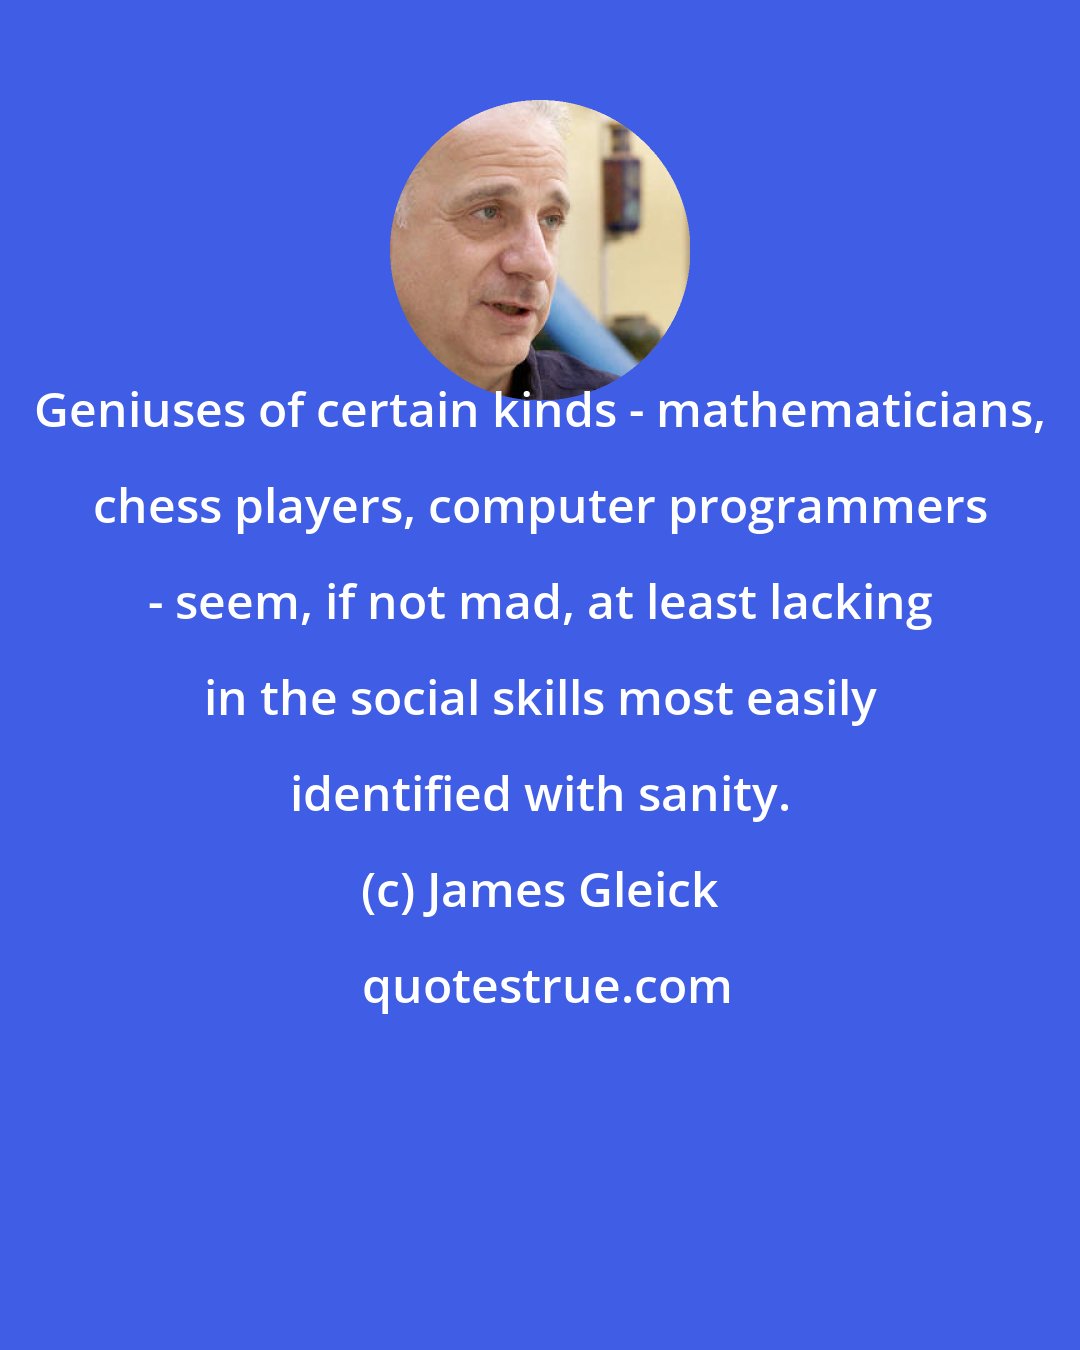 James Gleick: Geniuses of certain kinds - mathematicians, chess players, computer programmers - seem, if not mad, at least lacking in the social skills most easily identified with sanity.